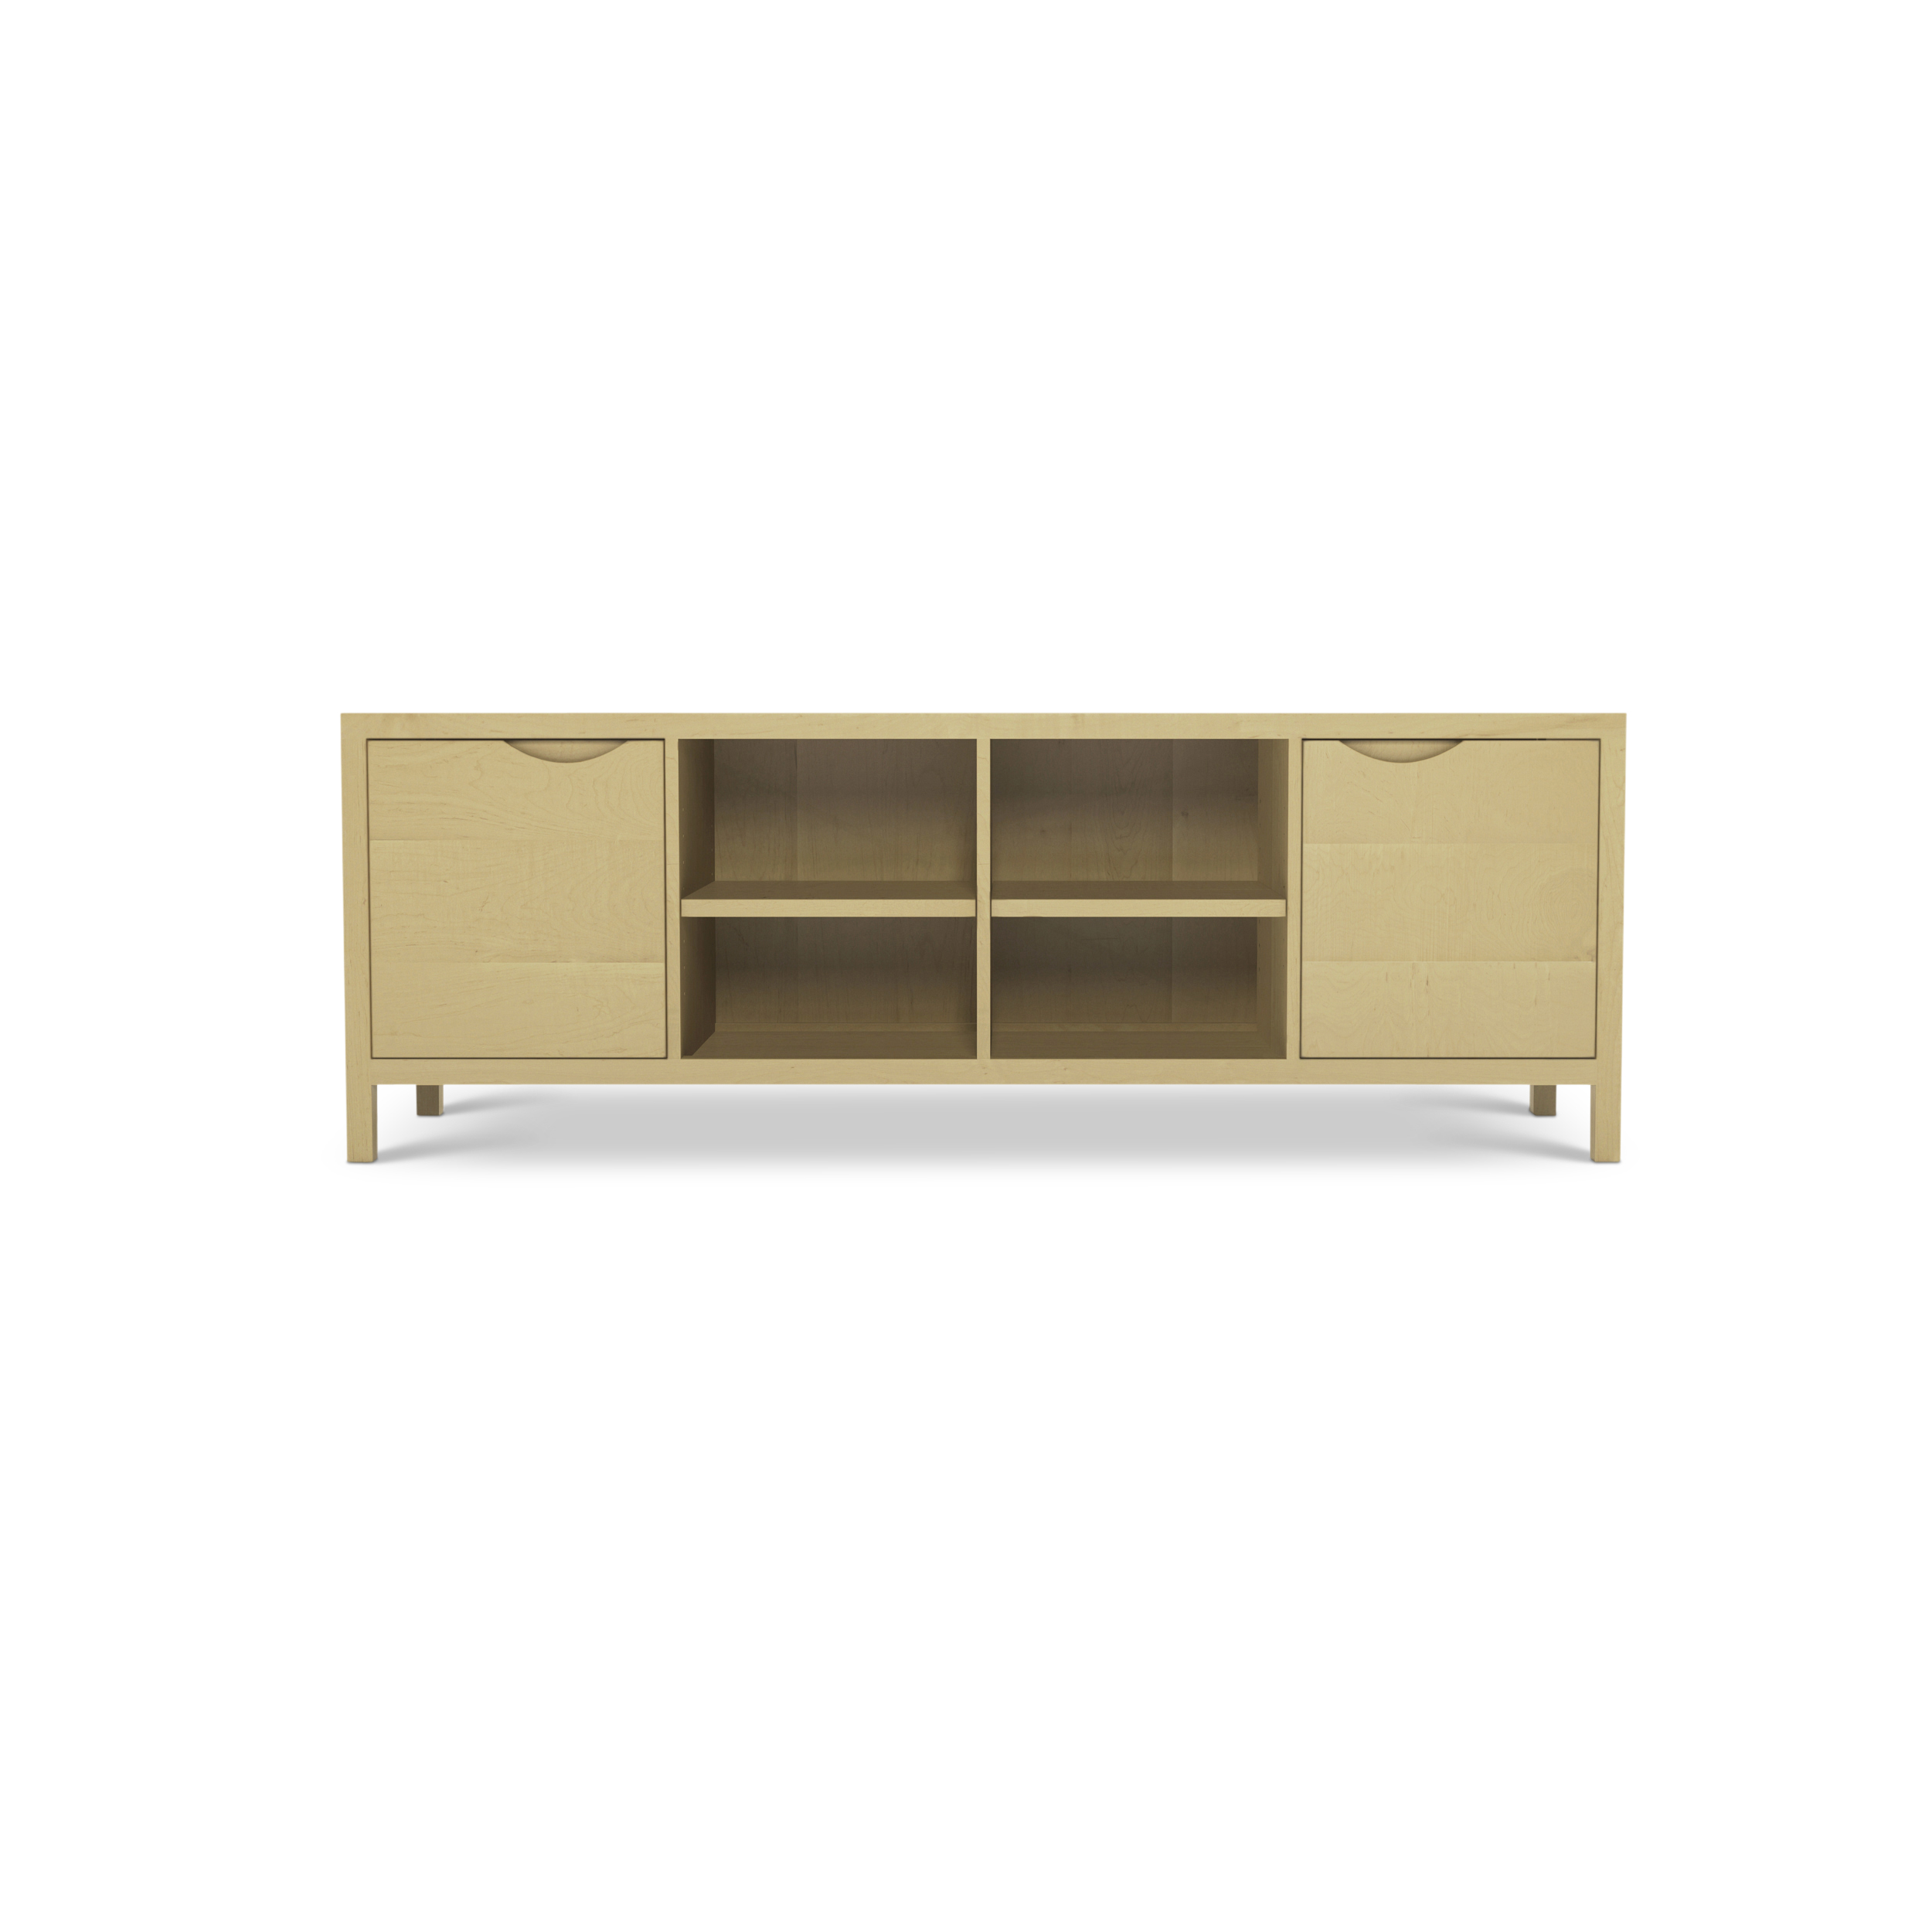 Series 353 Media Console With Two Doors At 72″ In Width